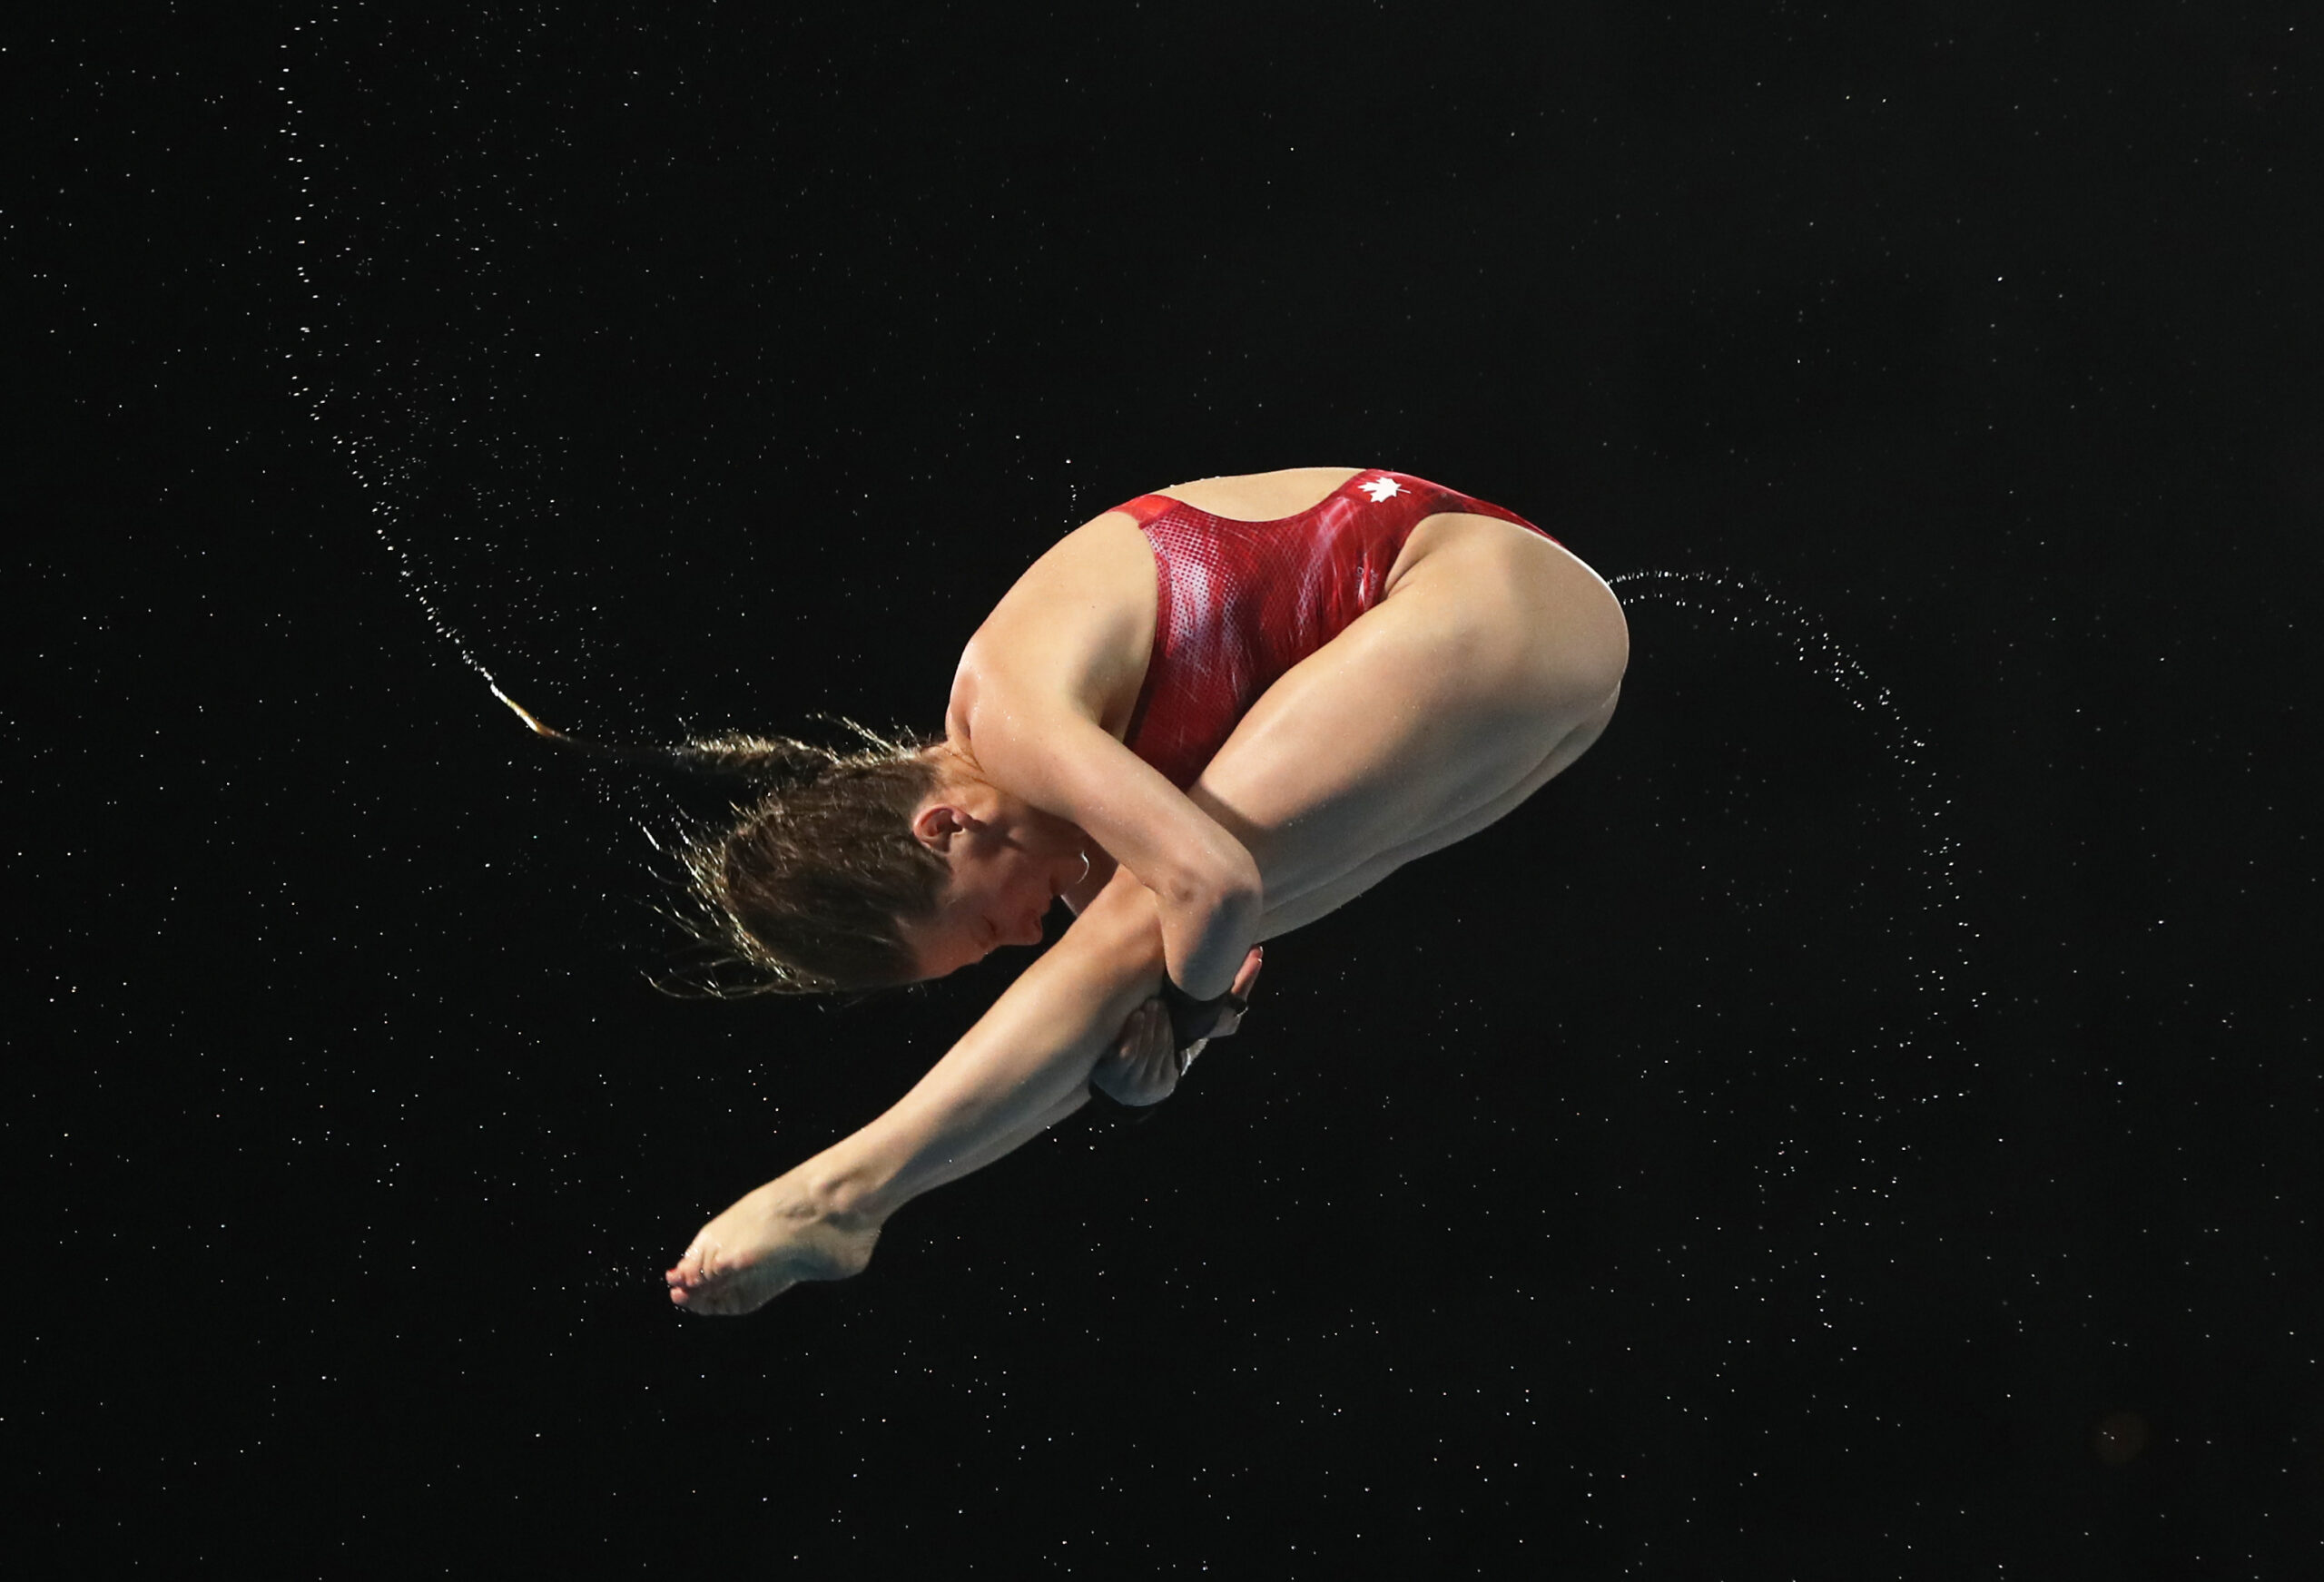 Canadian Divers Are Looking to Gain Experience and Win Medals in Birmingham